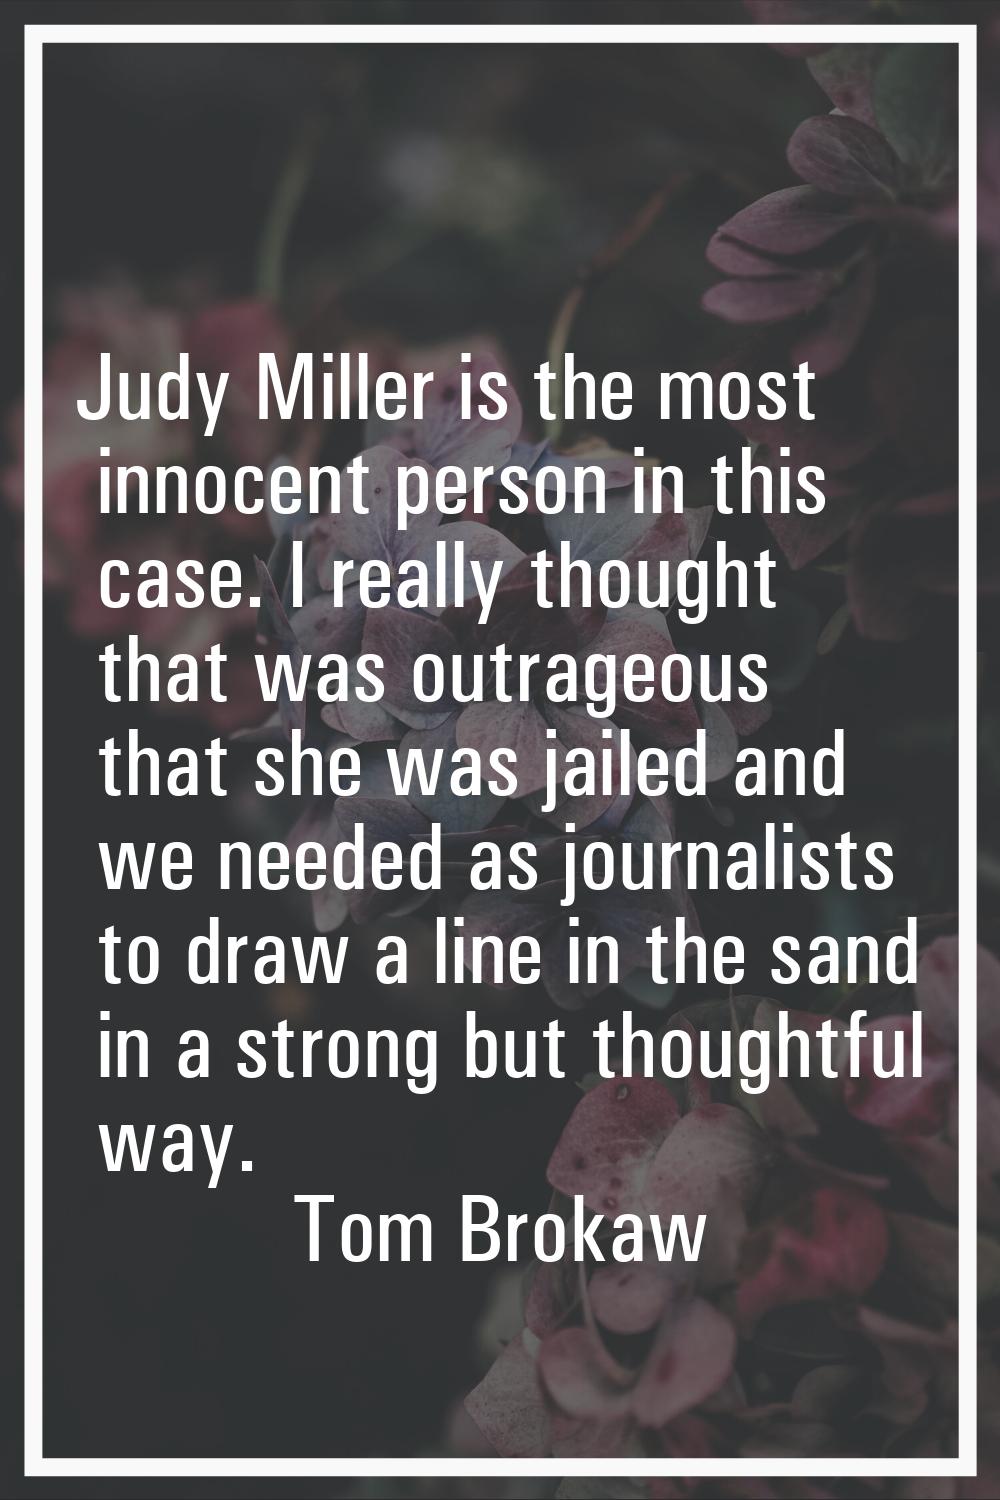 Judy Miller is the most innocent person in this case. I really thought that was outrageous that she